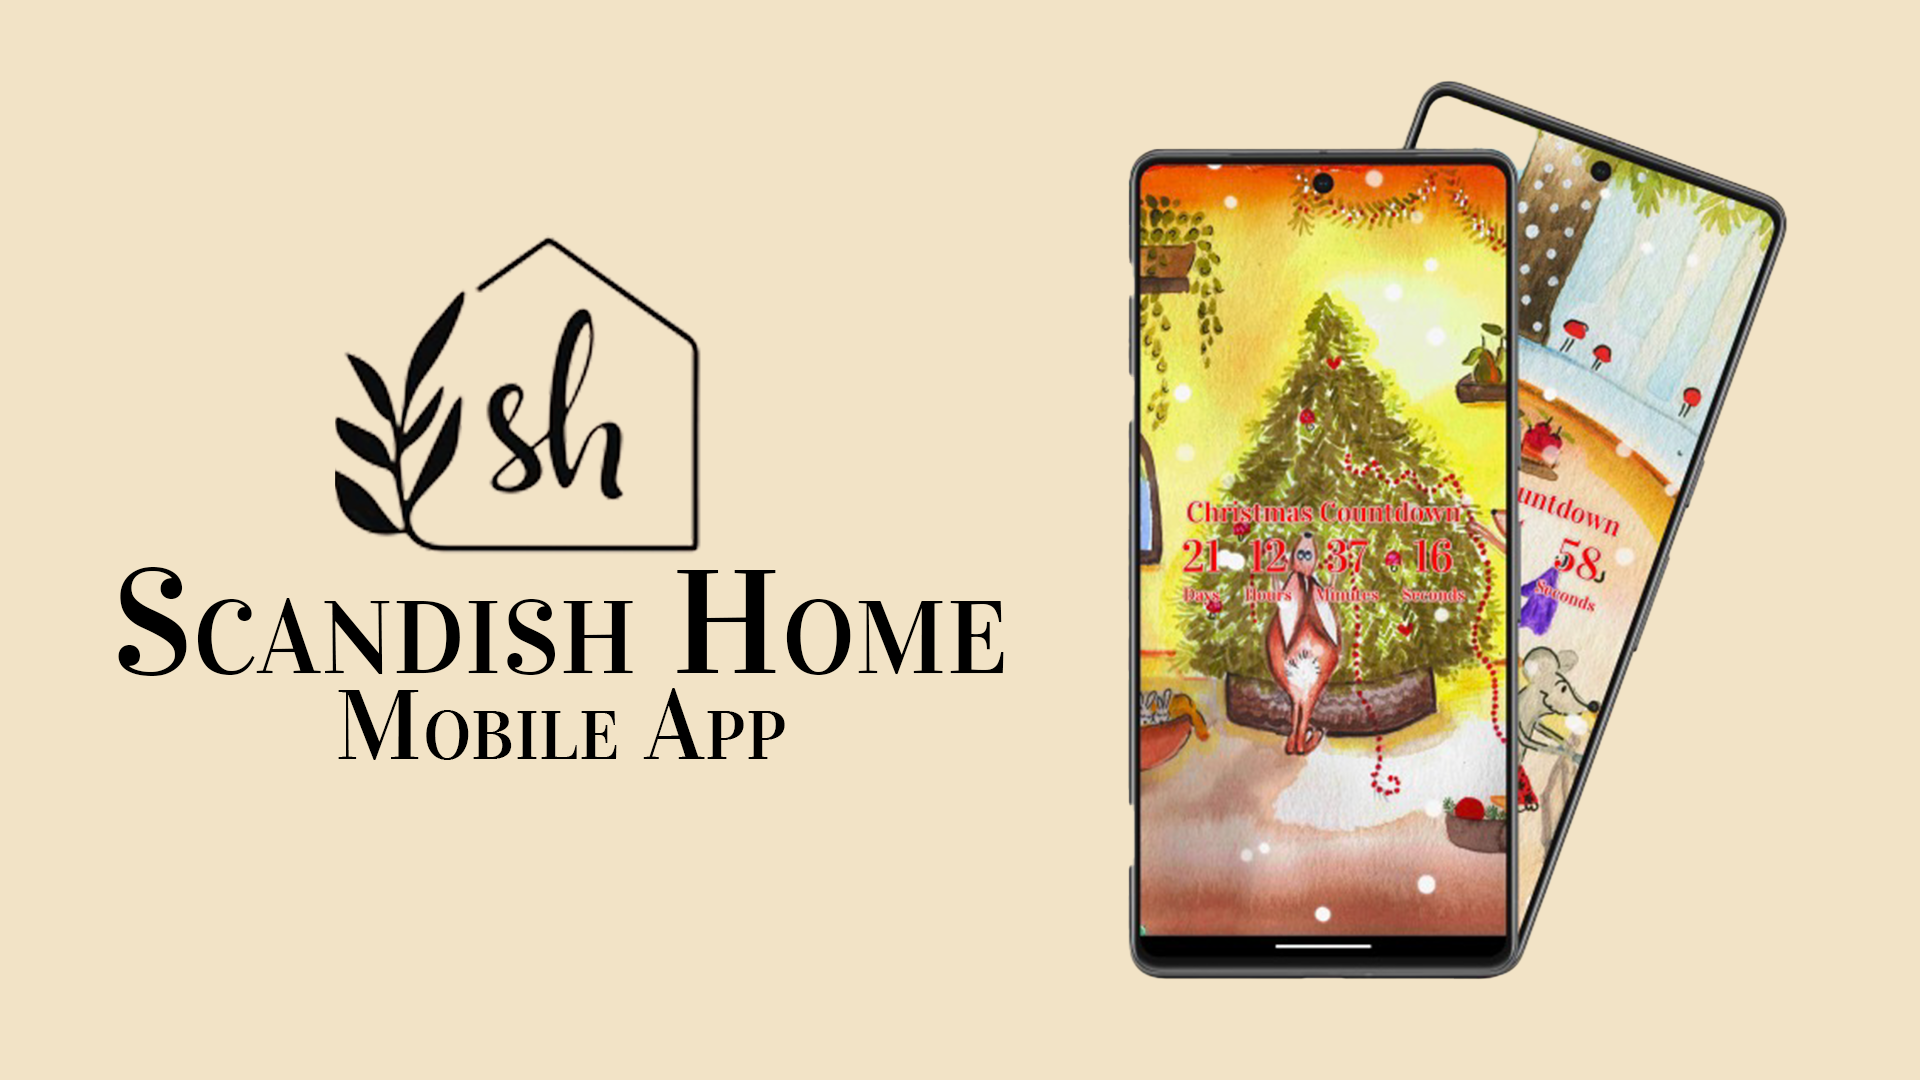 New Mobile App for Scandish Home